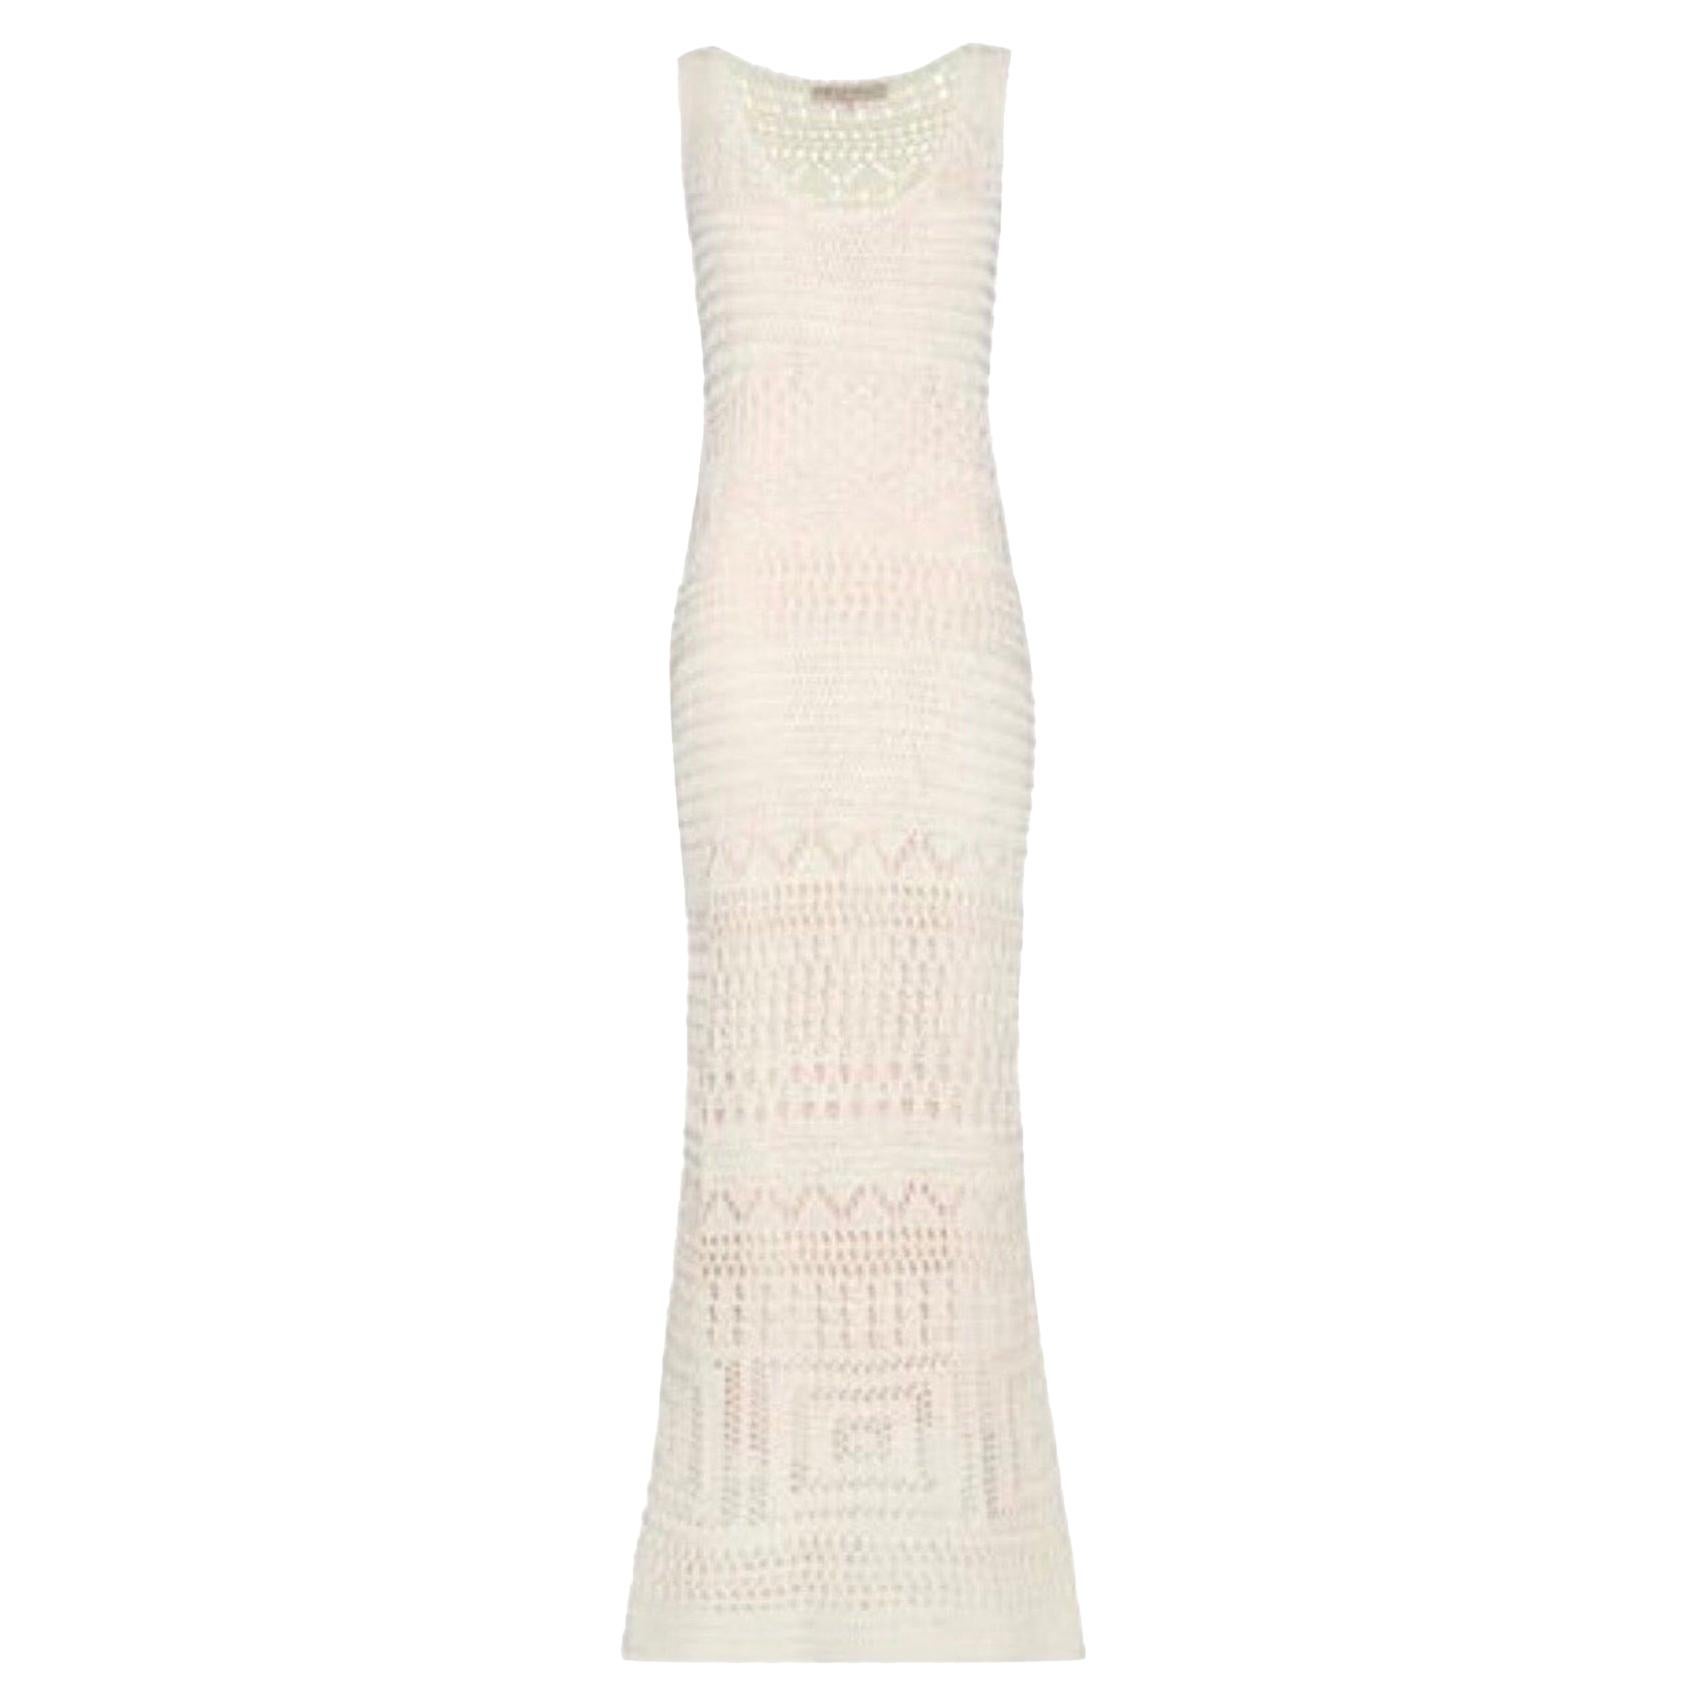 NEW Emilio Pucci Ivory Crochet Knit Maxi Dress Gown